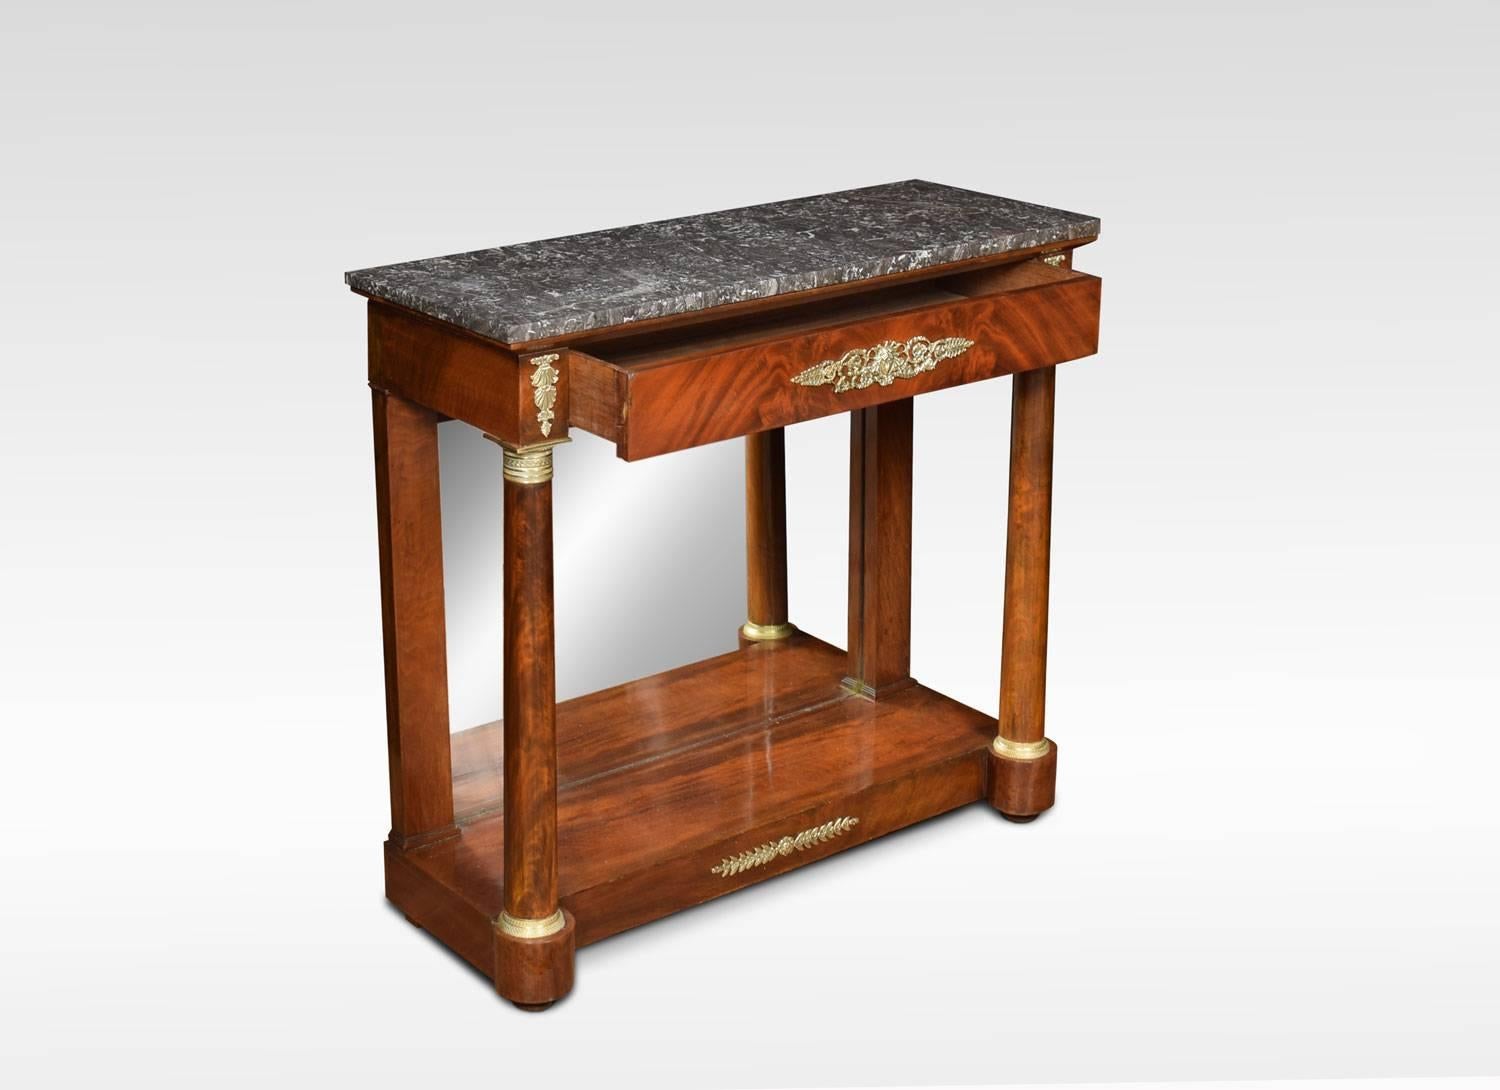 Regency mahogany and gilt metal mounted console table, the grey and white rectangular marble top above a single frieze drawer, raised on column supports with gilt metal capitals. The table having mirrored back, raised on plinth